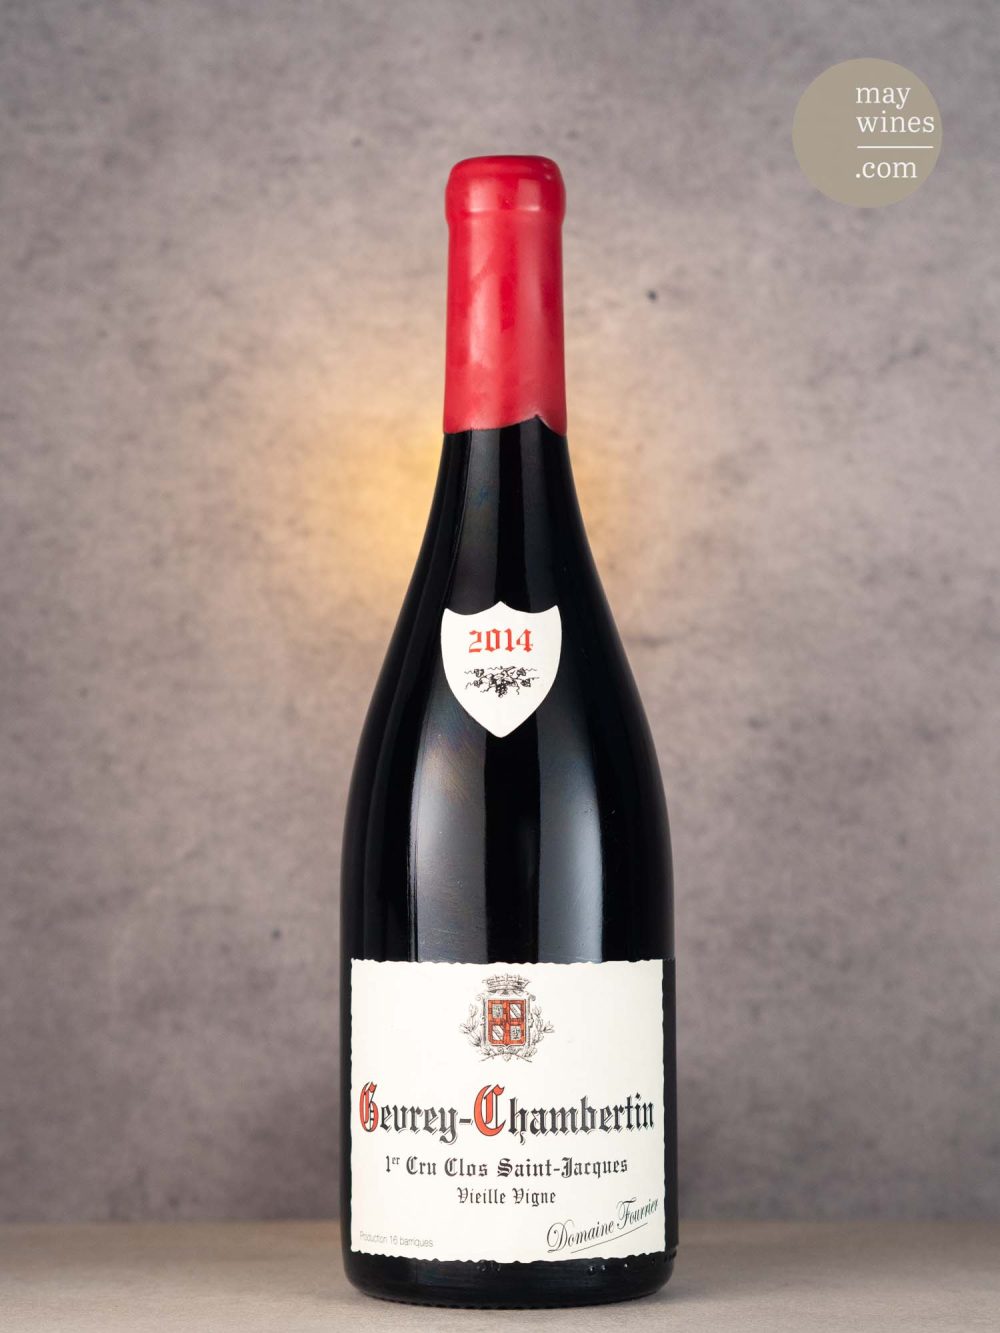 May Wines – Rotwein – 2014 Gevrey-Chambertin Clos St. Jacques Premier Cru - Domaine Fourrier